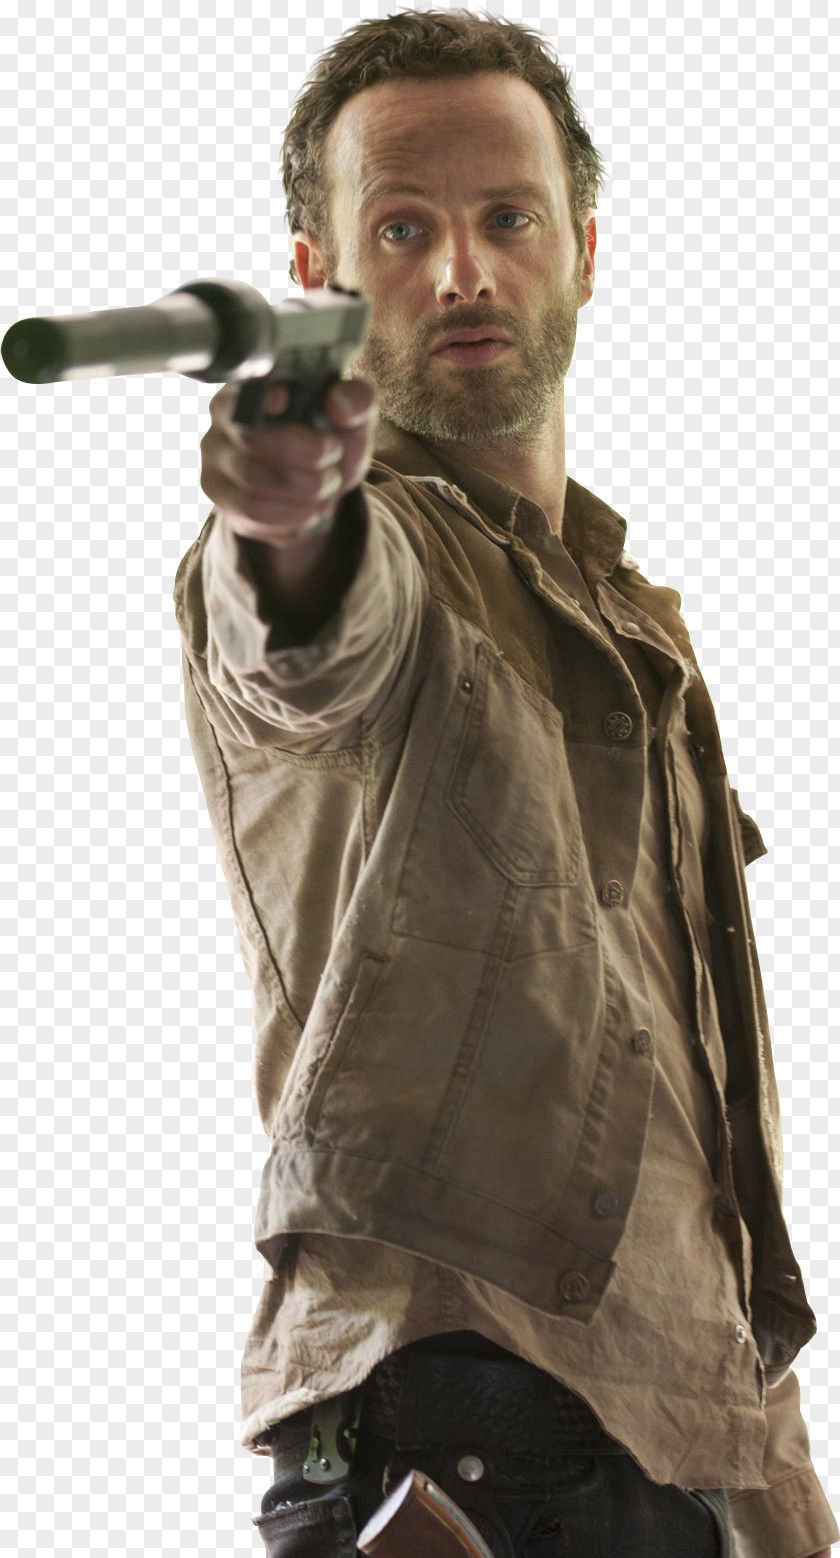 Season 3 Rick Grimes Merle DixonDead Andrew Lincoln The Walking Dead PNG